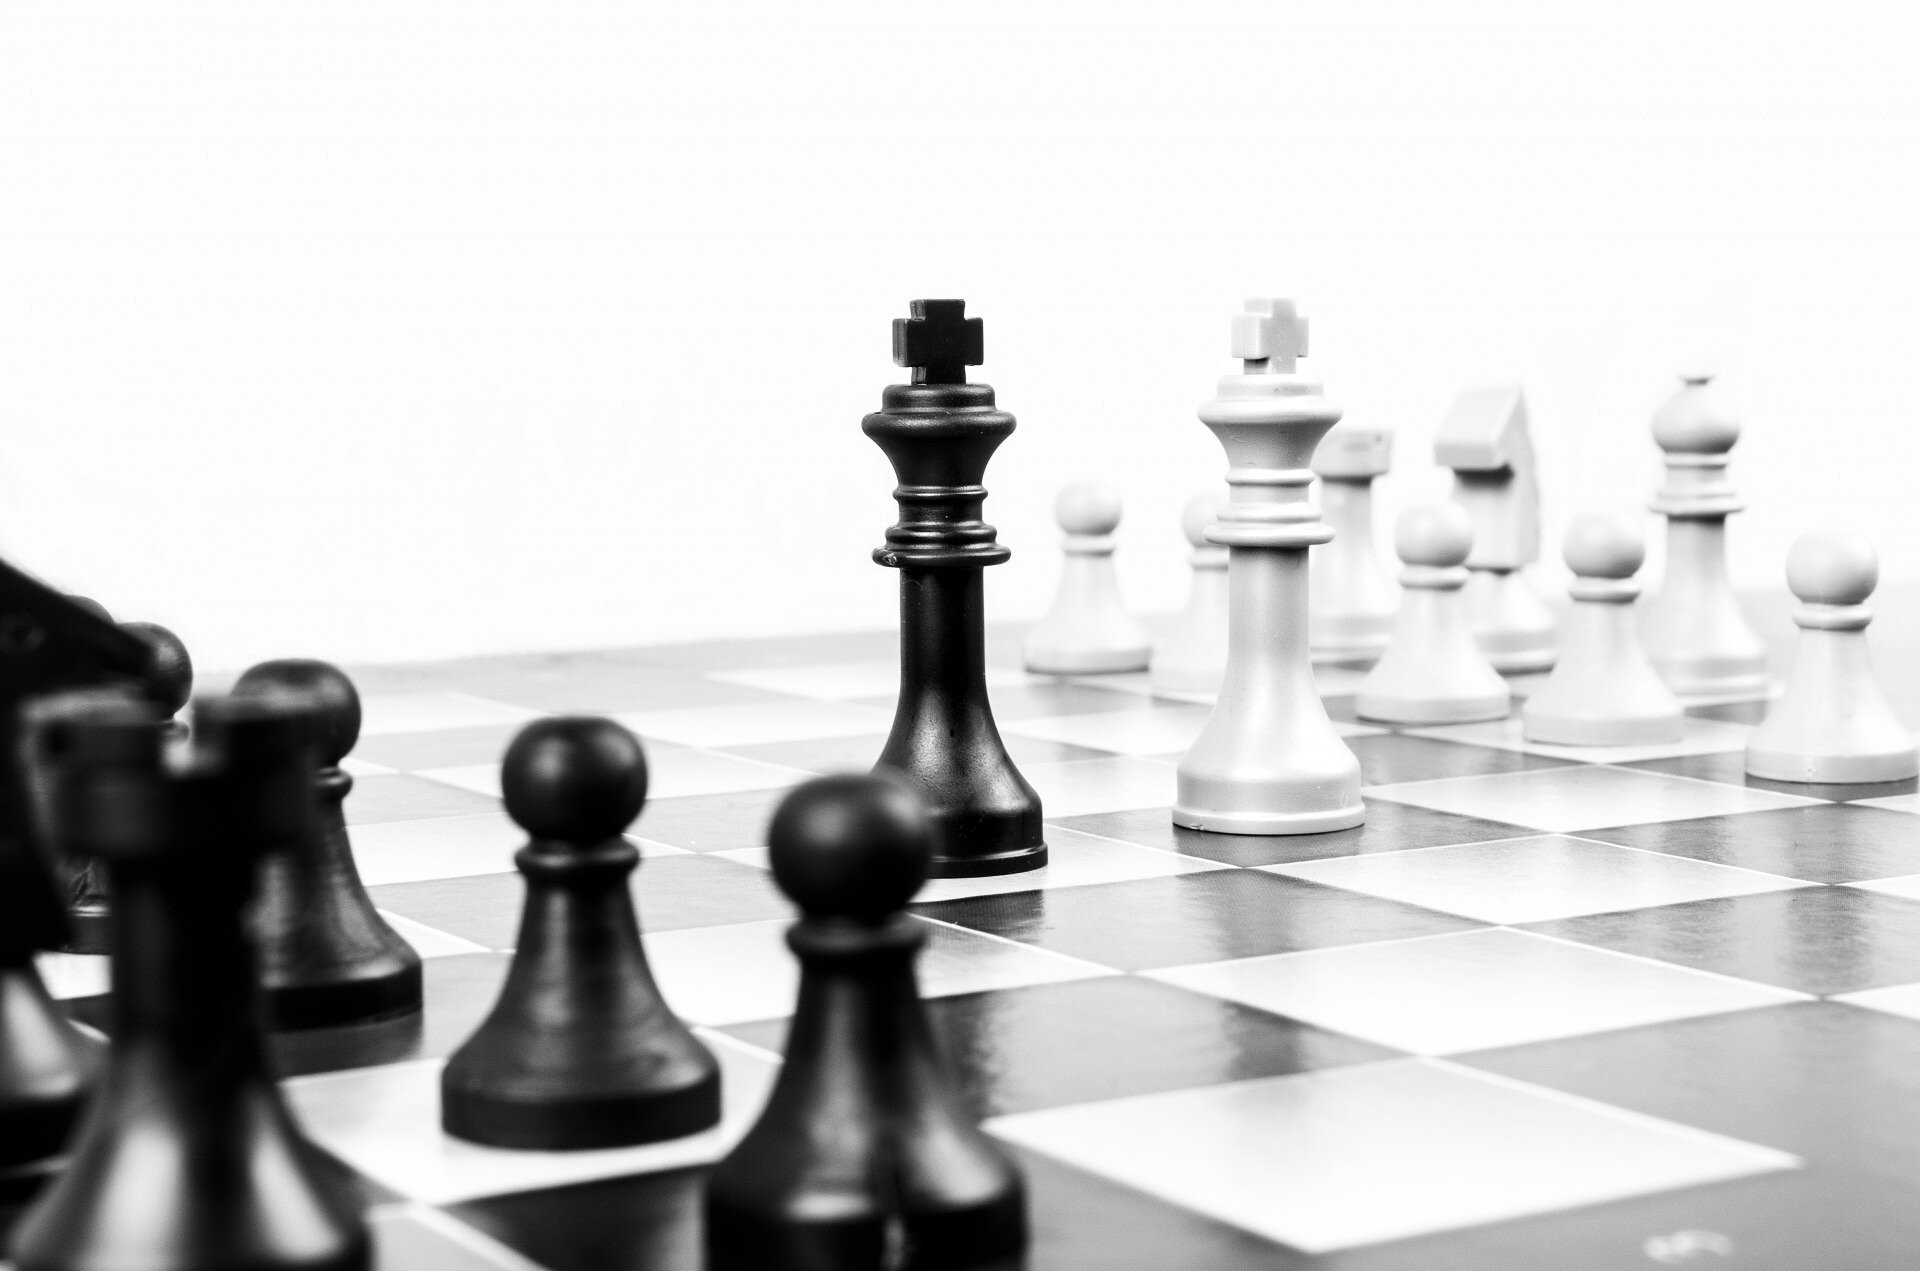 4 Chess Apps for Your Android Phone — Mind Mentorz